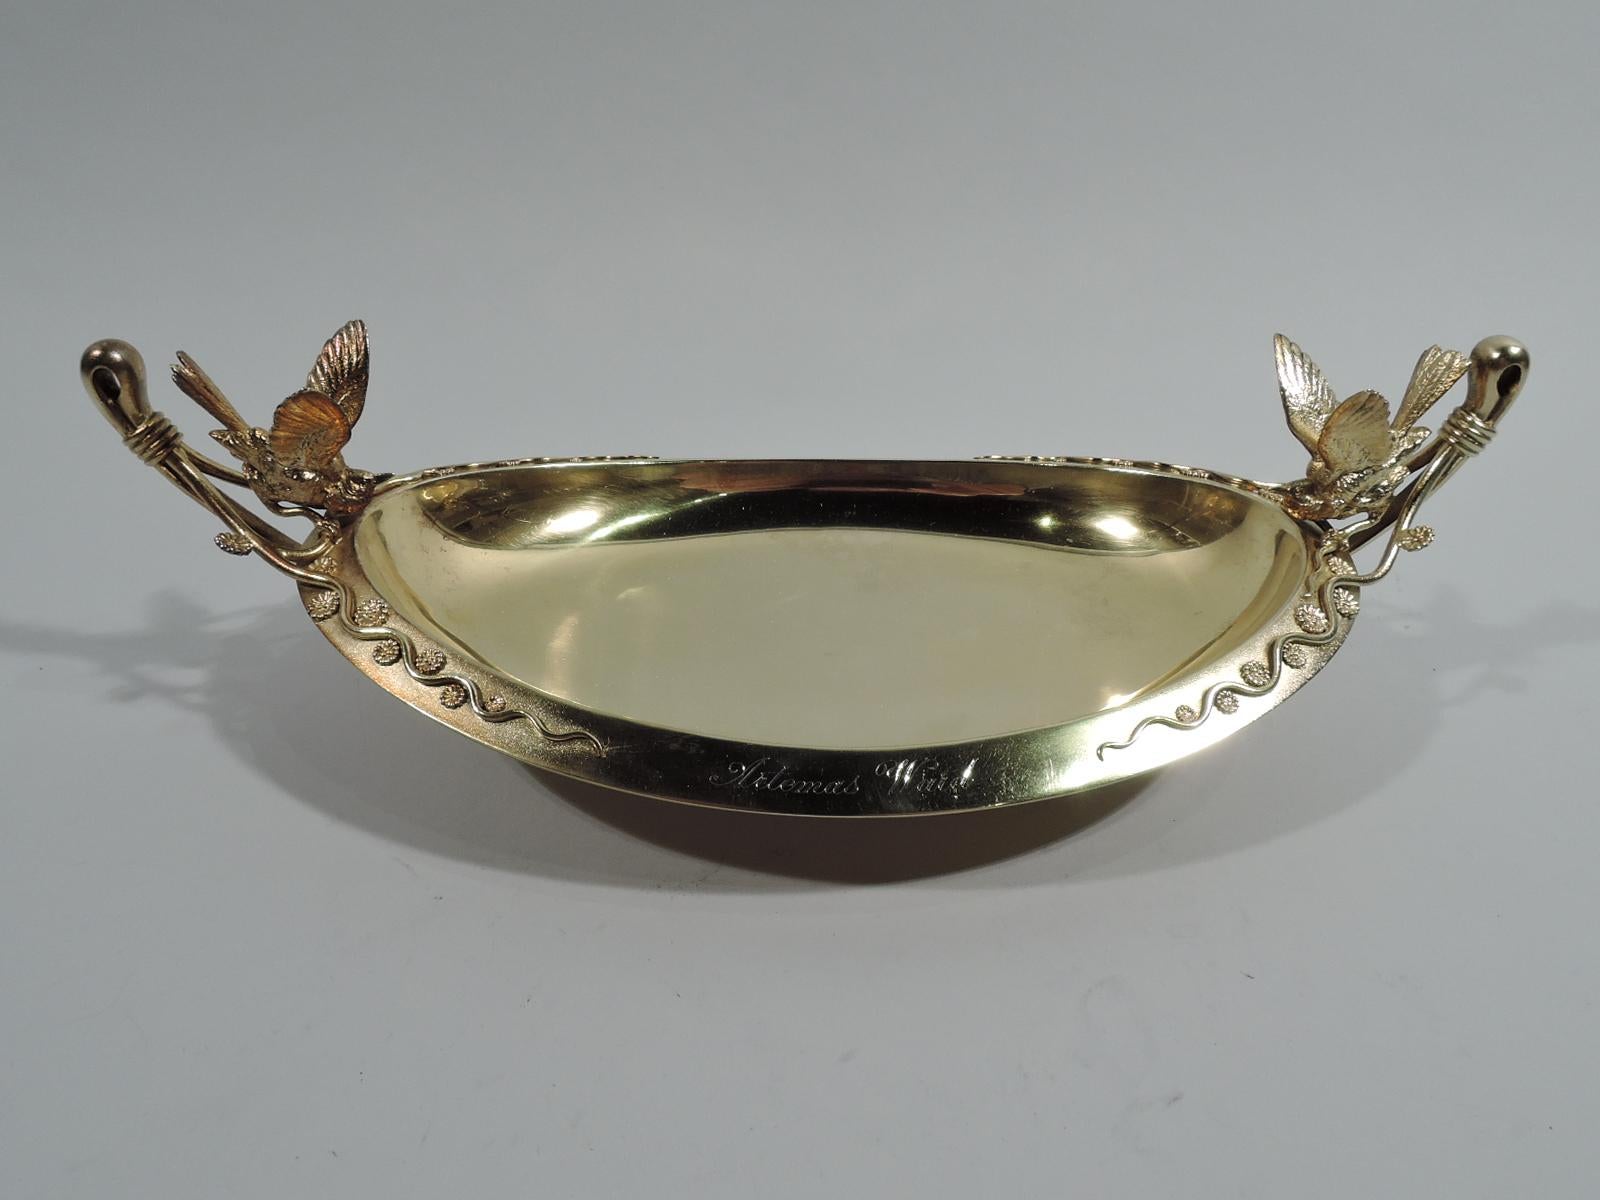 Rare Japanese sterling silver bowl. Made by Tiffany & Co. in New York. Oval well and turned-down rim. At ends are bird figures and handles comprising reed-wrapped loops with split mounts terminating in squiggly tendrils interspersed with applied